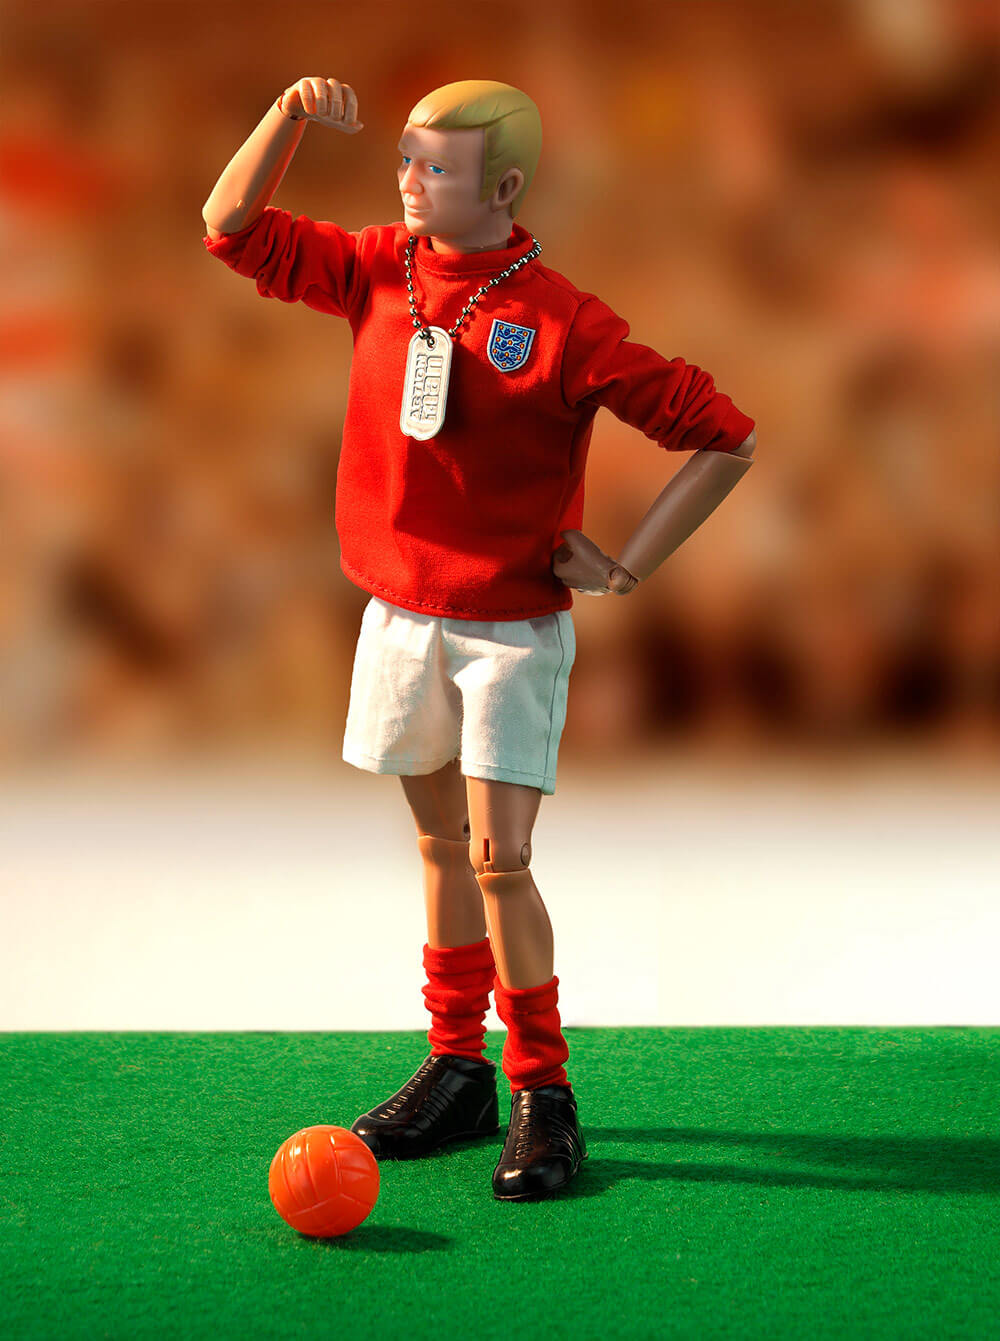 bobby moore action man